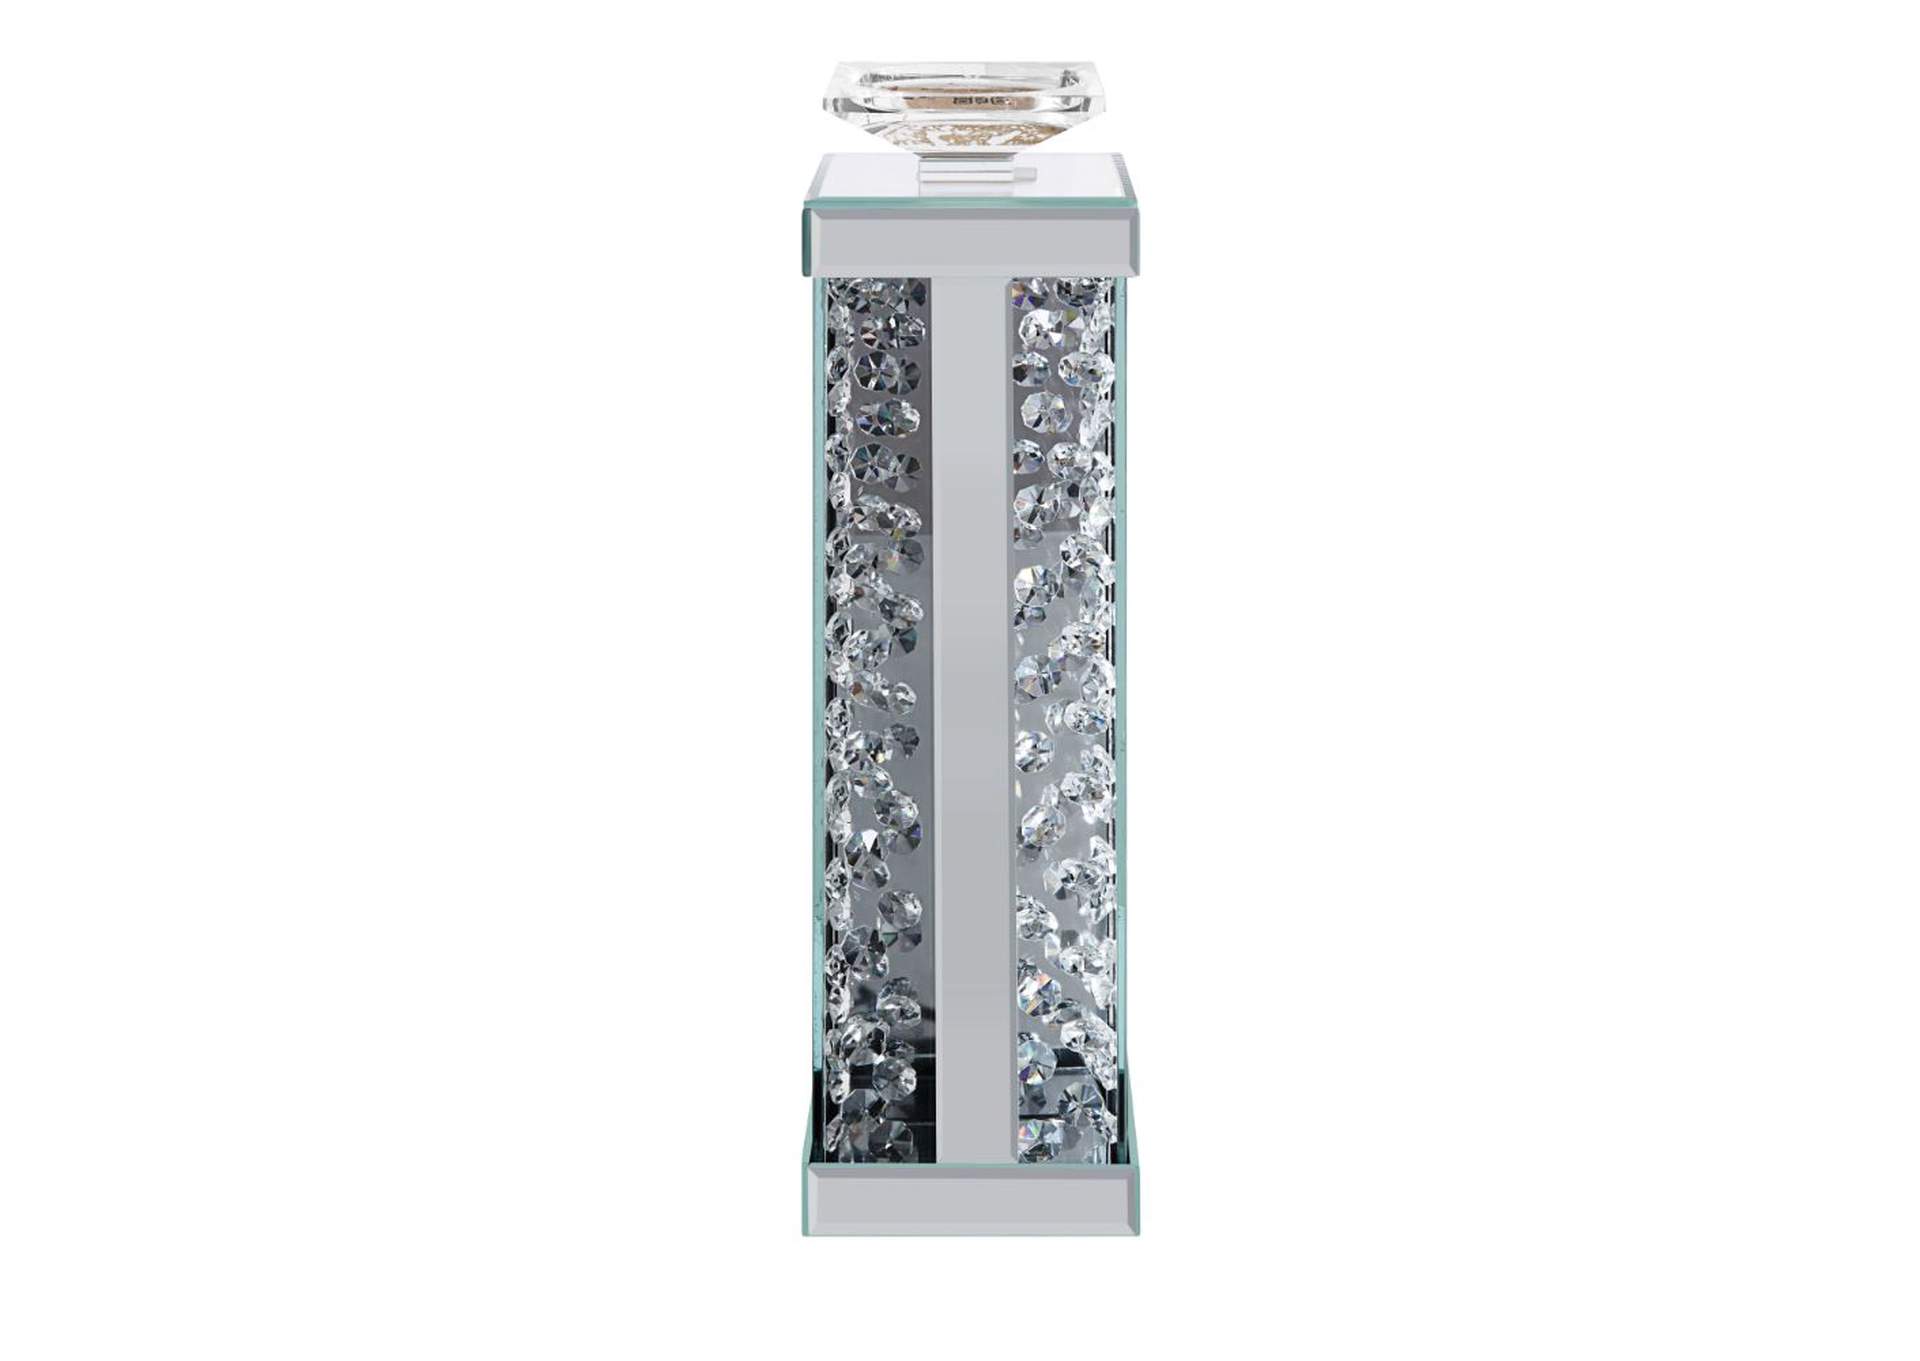 Nysa Mirrored & Faux Crystals Accent Candleholder,Acme